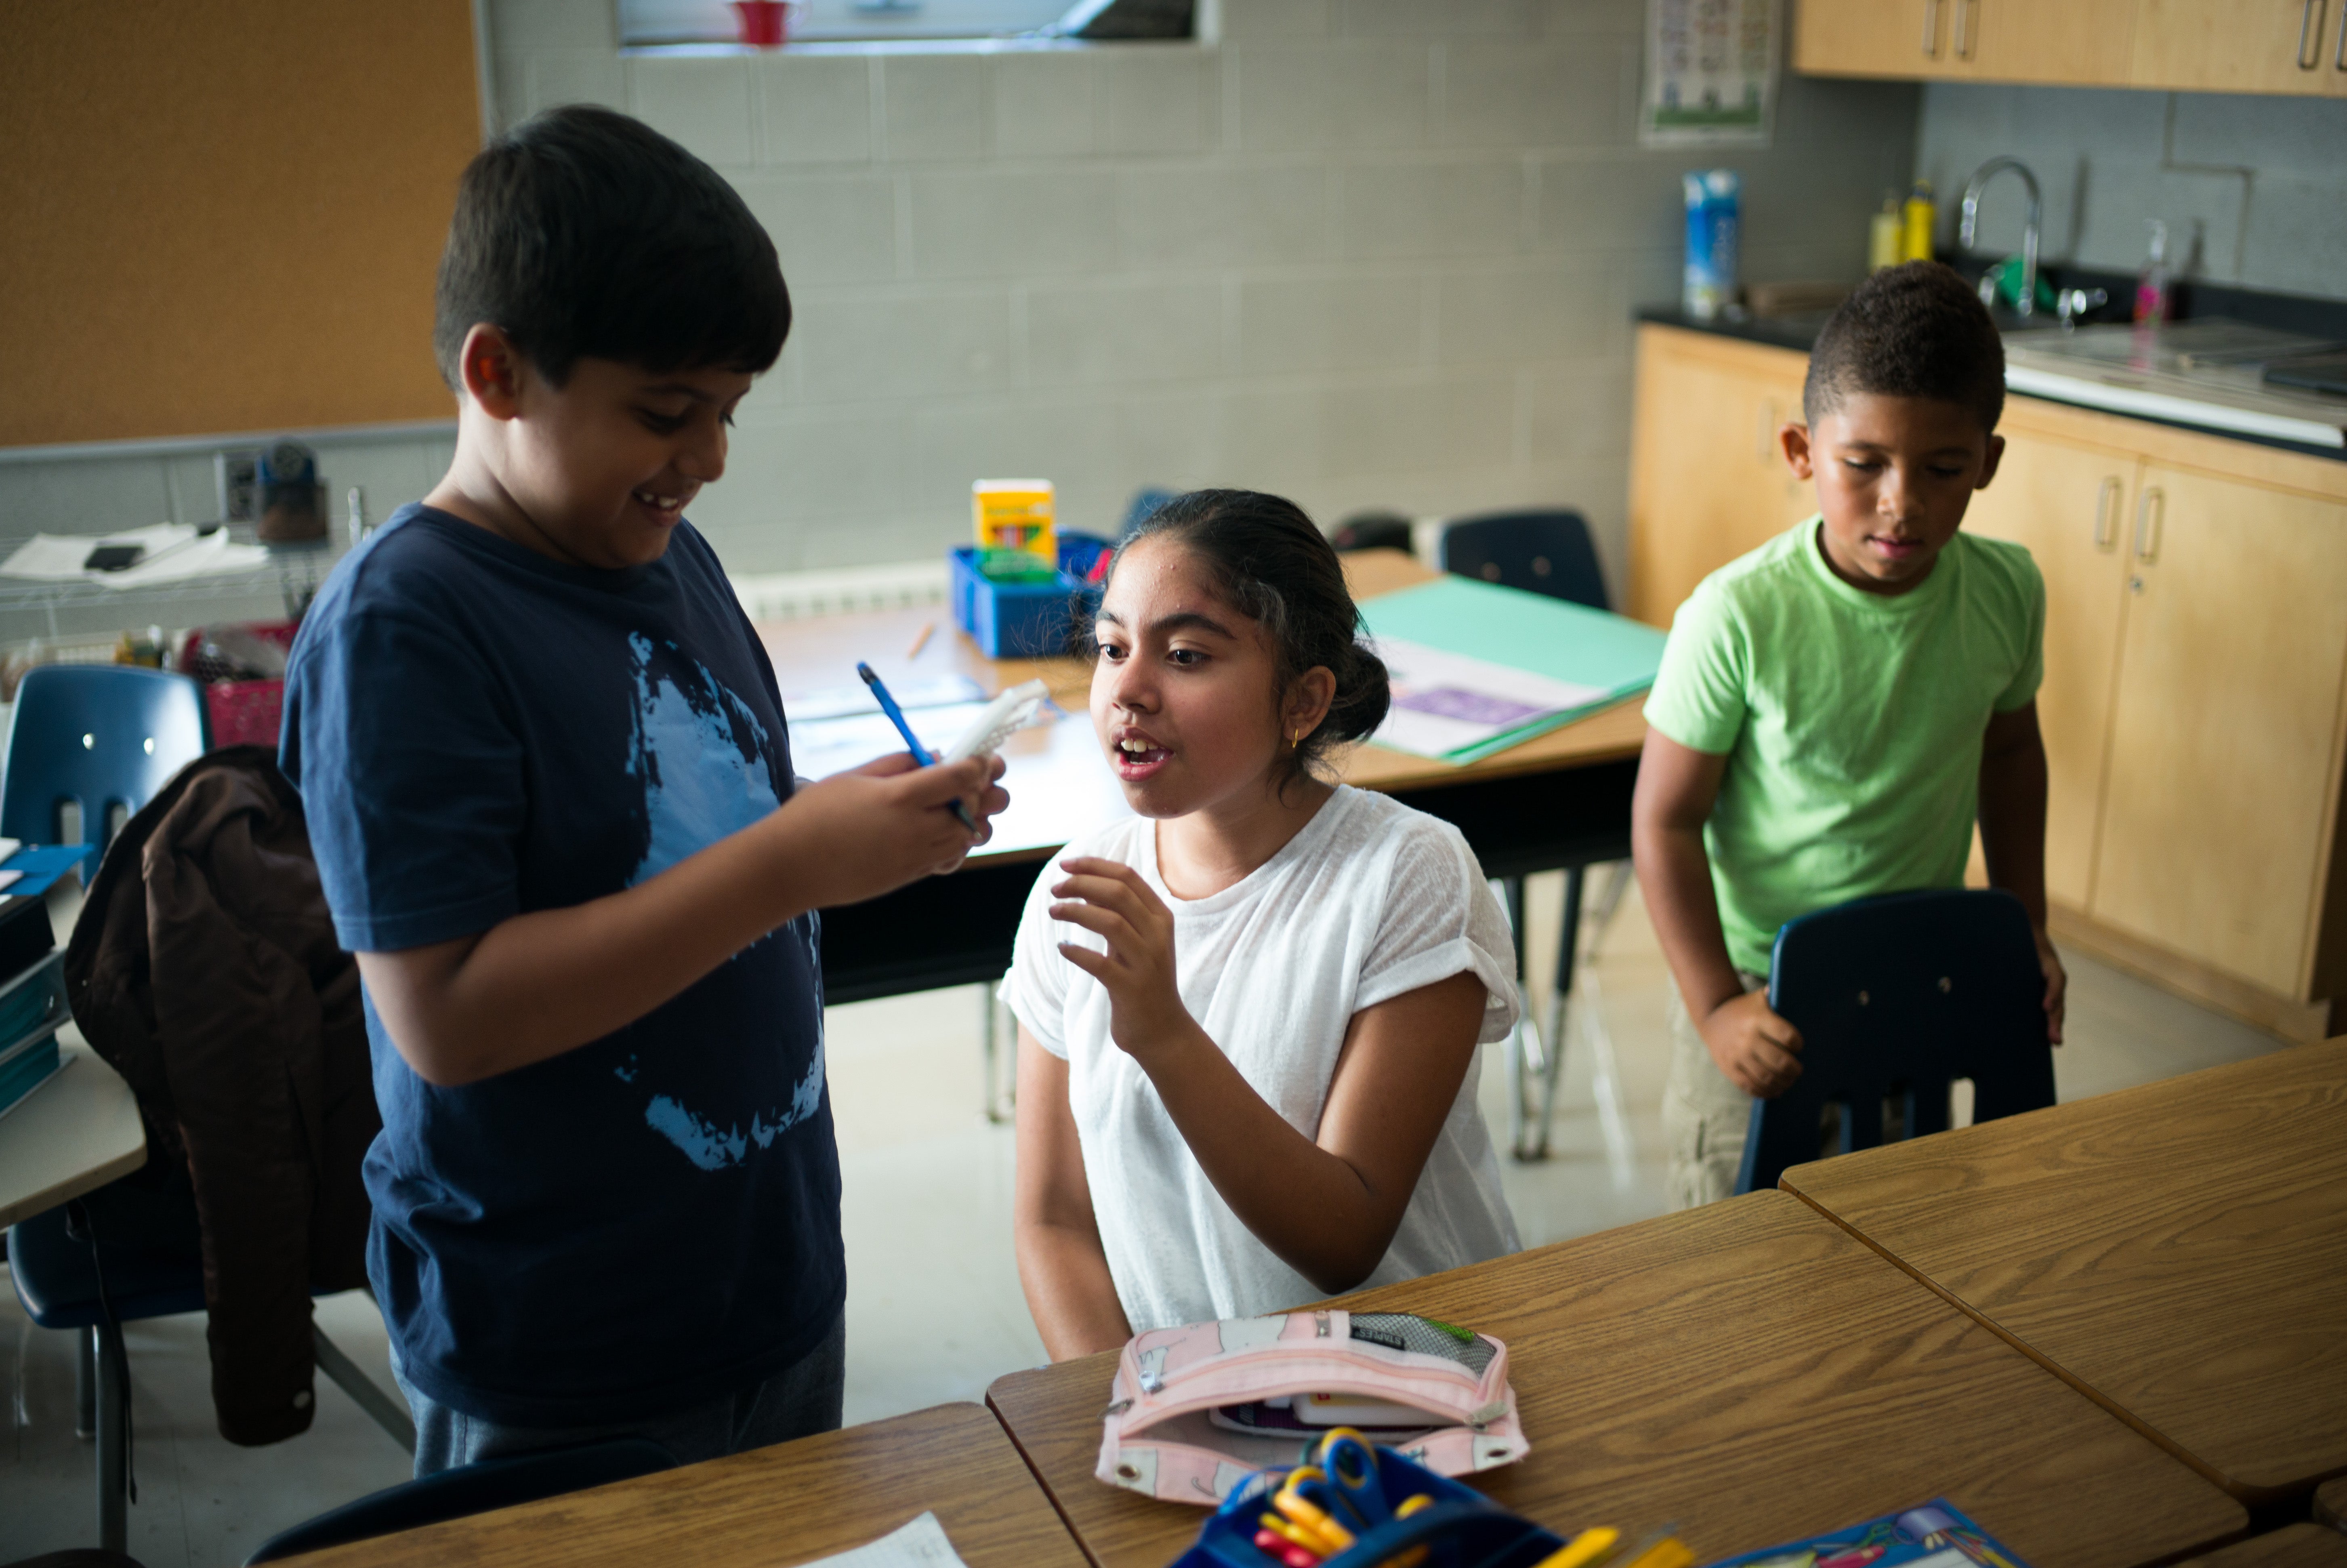 Fourth grader Sirvat Labiba (center) in class at Crescent Town Elementary School in Toronto, Ontario, Canada. (Ian Willms/For Keystone Crossroads)